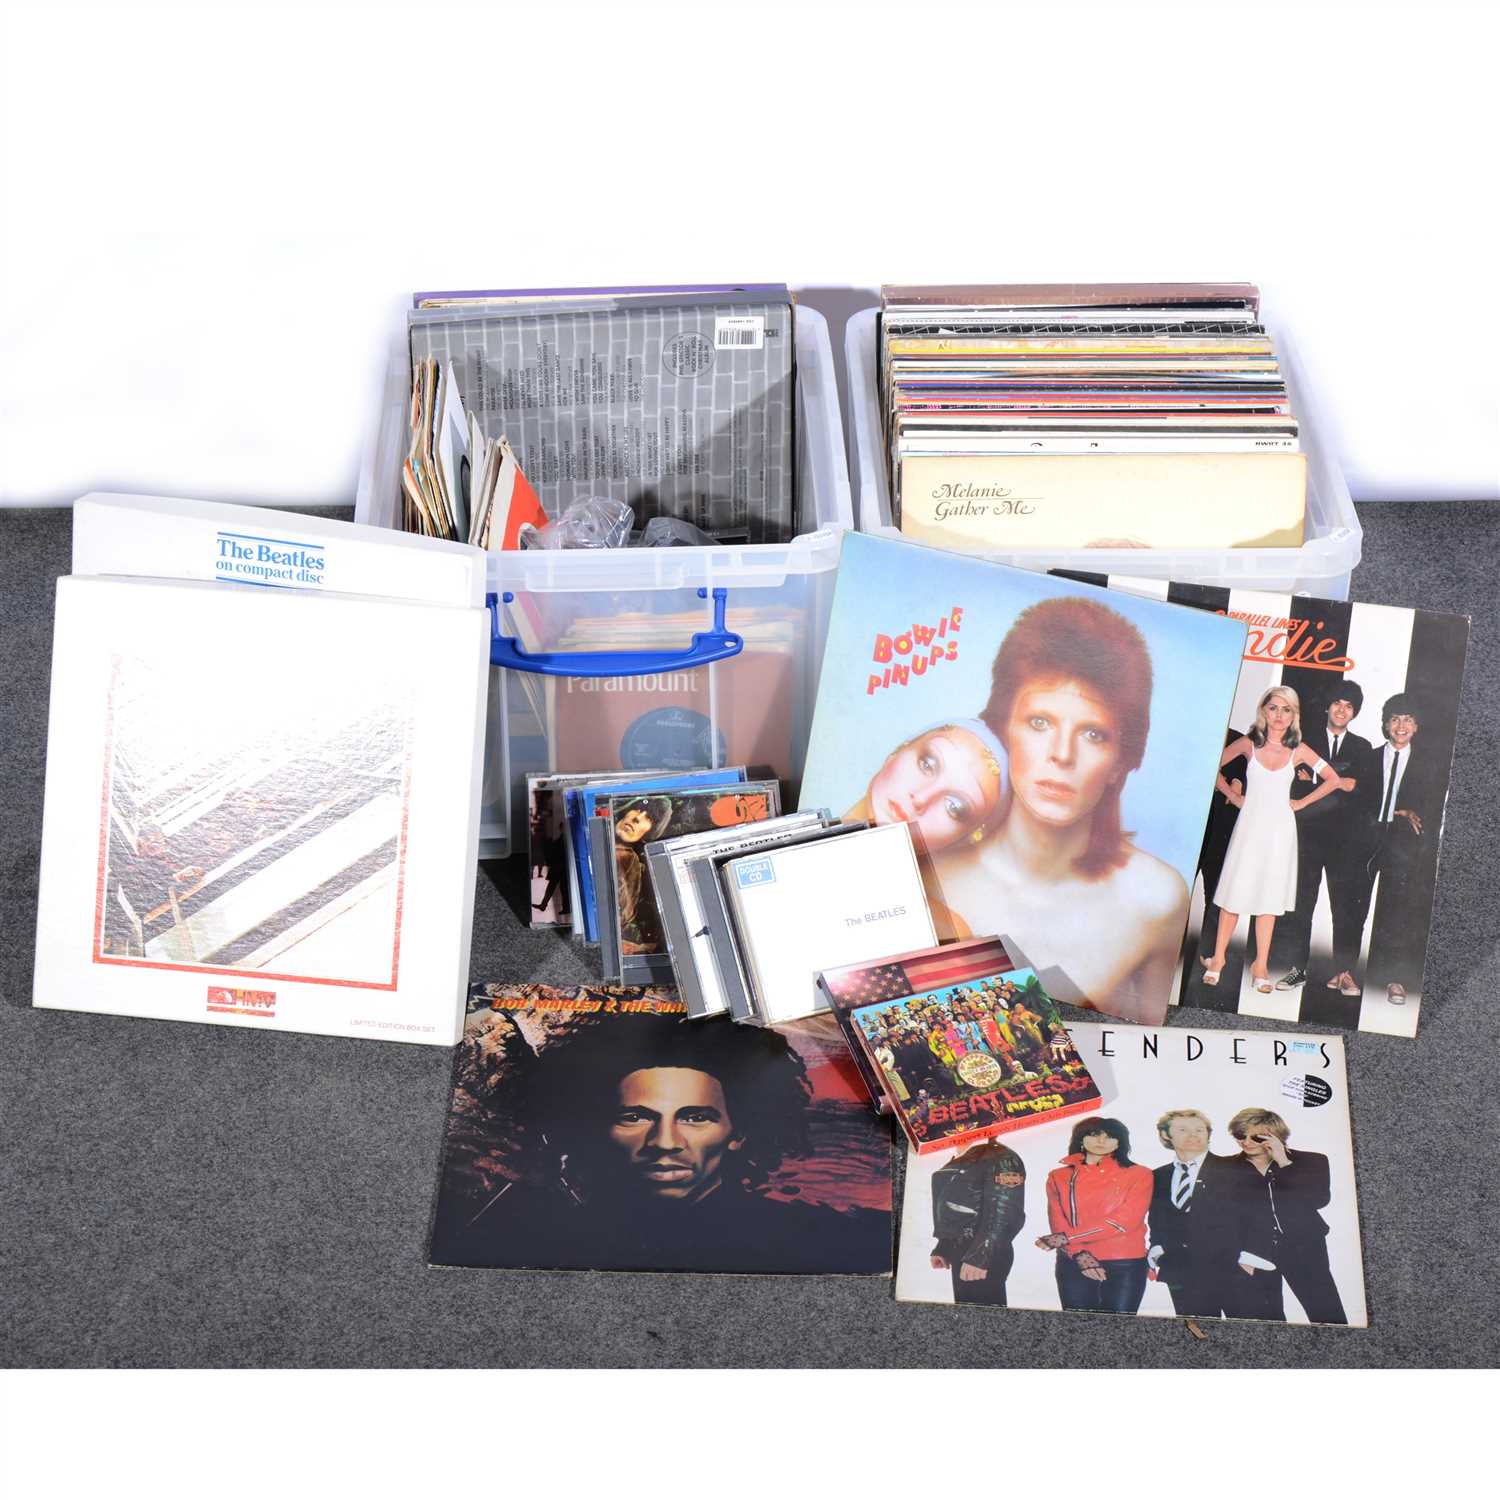 Lot 681 - Two boxes of vinyl records and CDs, including David Bowie, Queen, etc.